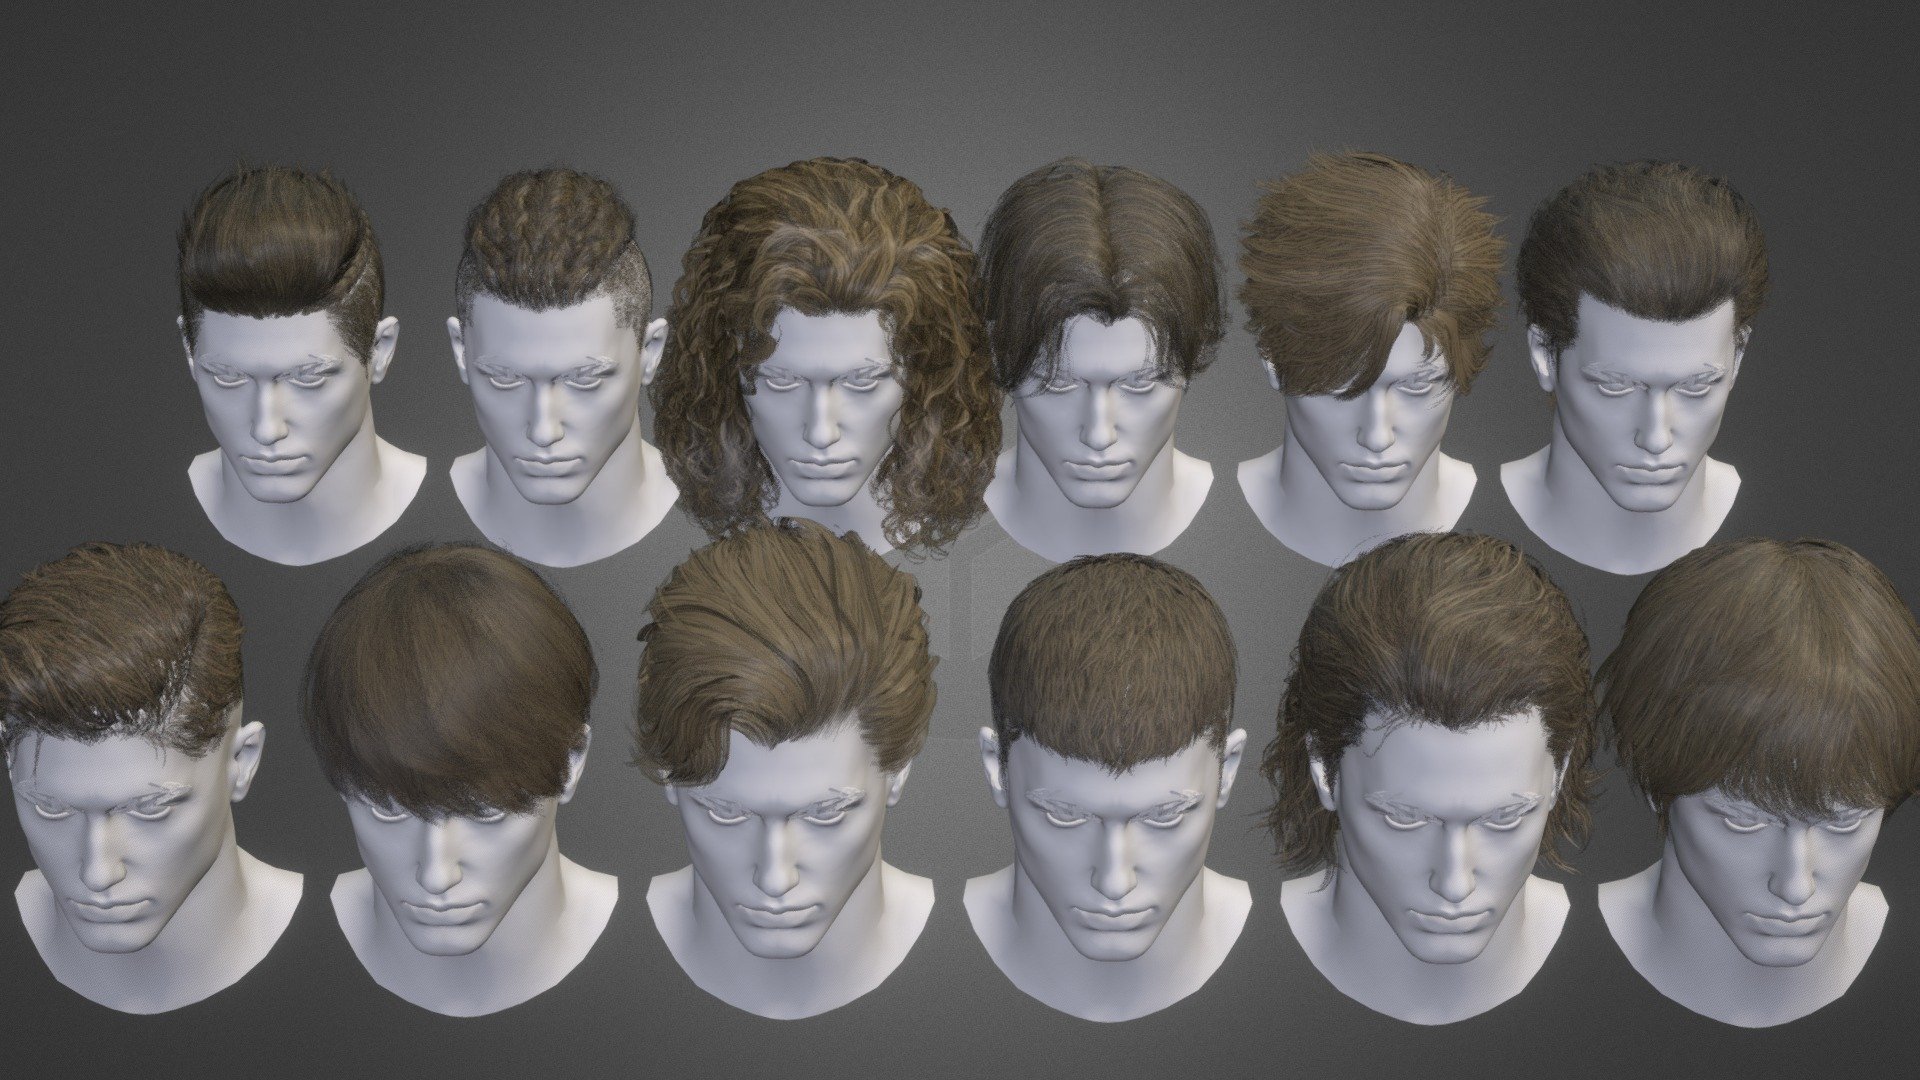 If you want male and female hair styles please visit my other popular products. 

Realtime hairstyle libilary:https://www.artstation.com/artwork/OGrlYb

hairstyles for male collection-01:https://www.artstation.com/a/27767557

hairstyles for male collection-02:https://www.artstation.com/a/33973718

hairstyles for male collection-03:https://www.artstation.com/a/34367499

hairstyles for male collection-04:https://www.artstation.com/a/34828845

hairstyles for male collection-05:https://www.artstation.com/a/35010070

Suitable for games &amp; both low-poly &amp; high-poly characters.Different hairstyles can be seperated and combined into more hairstyles.

All models have a clean topology and UVs, And ready to use.

Textures size 1024.Diffuse  Normal map and Alpha map included.

BLENDER 3.1 .FBX OBJ DAE Marmost toolbag 4 MAYA 2019 fomat included.

polycount(tris):114906 tris polygons for all 12 hairs. So each one is about 8000 tris polygons .

If you just want some hairstyles,very welcome to pm me.

Have a nice day~ - 12 Real-time men Hairstyles collection 06 - Buy Royalty Free 3D model by Vincent Page (@vincentpage) 3d model